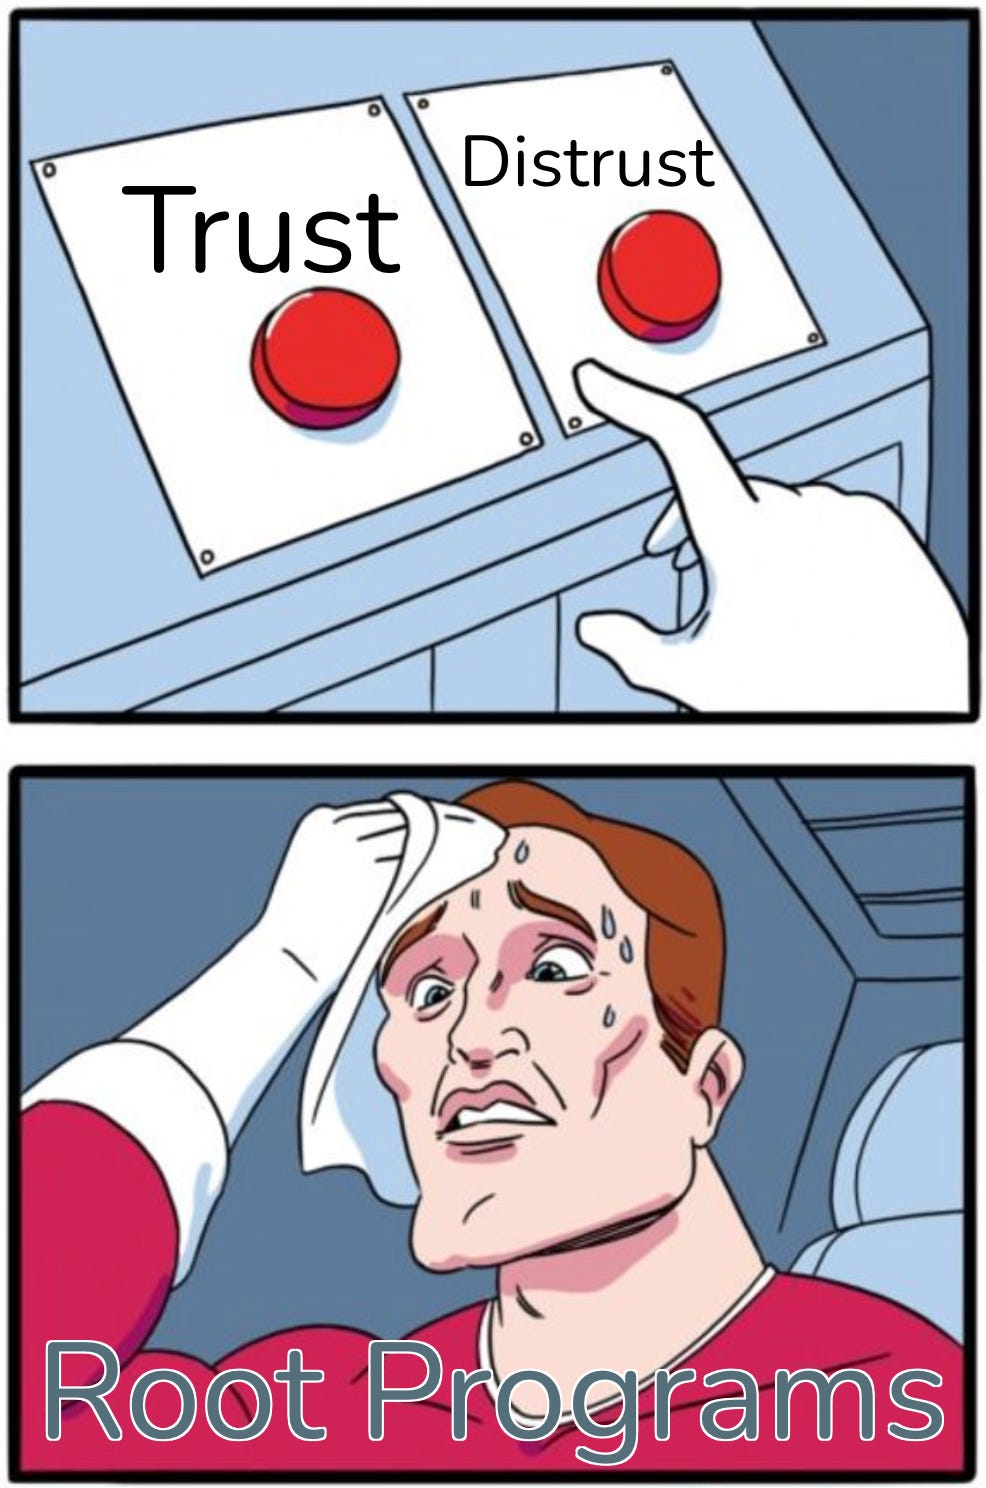 Two button meme, one button labeled Trust, the other labeled Distrust. A person sweating between making a decision between the two options.